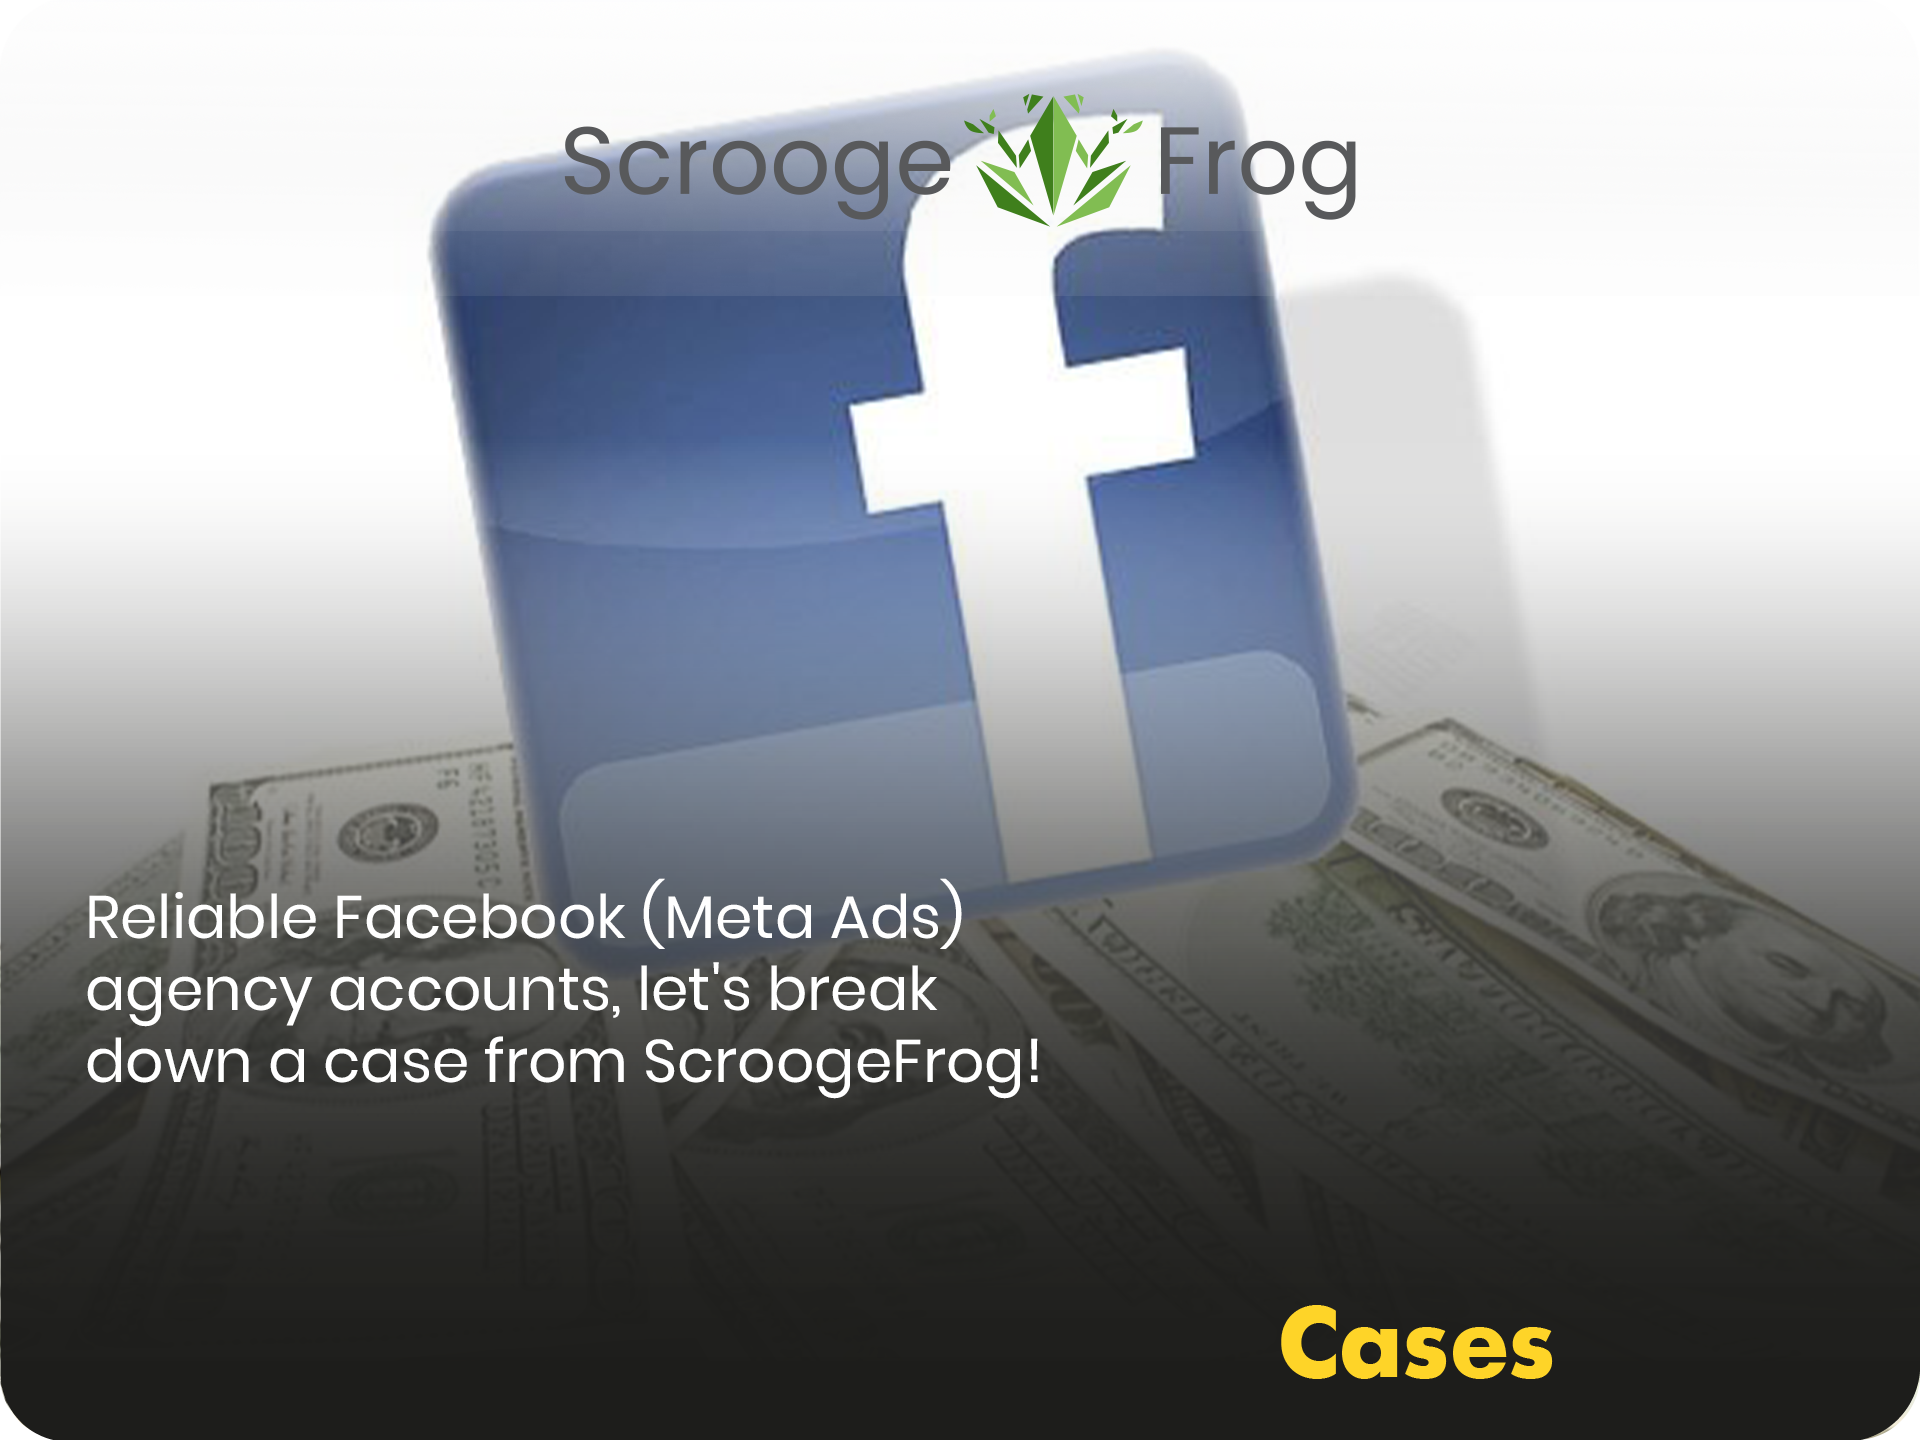 Forex vertical that is constantly banned! There is a solution – trust Facebook agency accounts, let’s break down a case from ScroogeFrog!